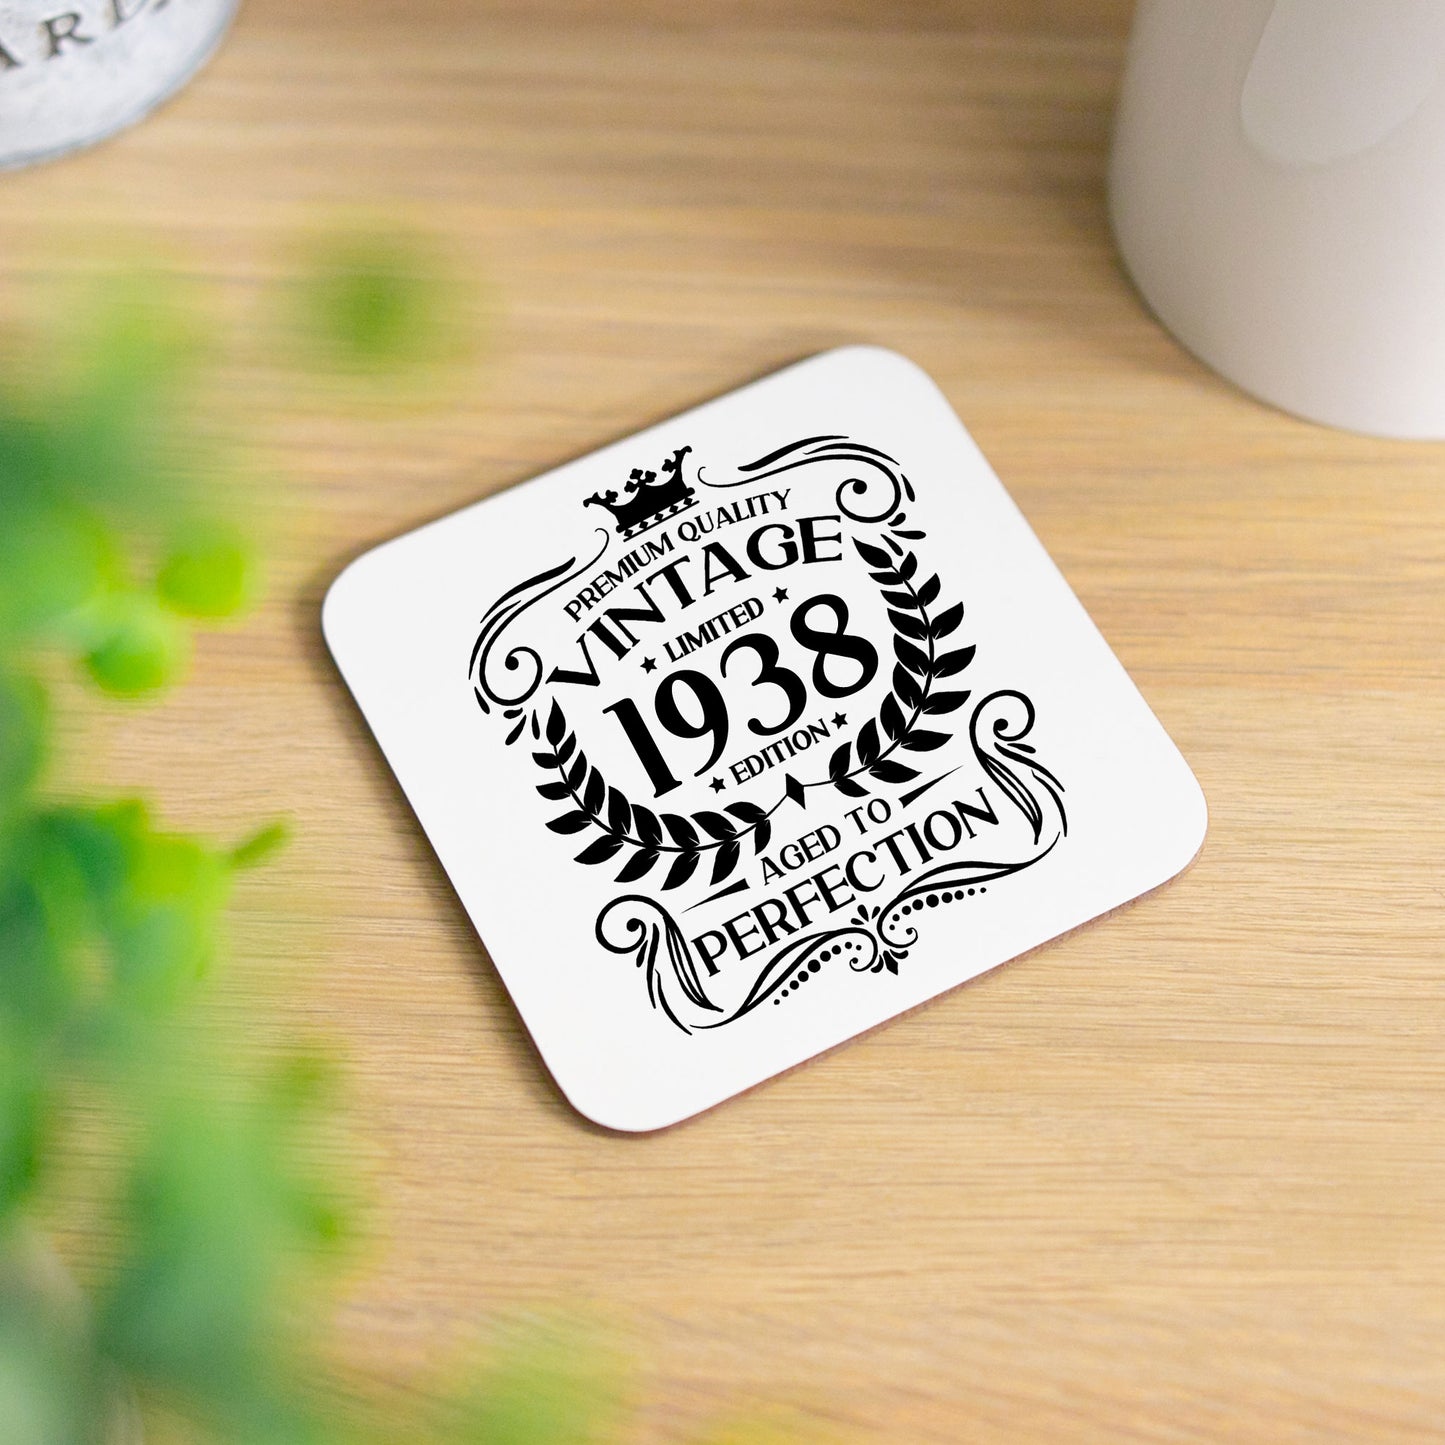 Vintage 1938 85th Birthday Engraved Gin Glass Gift  - Always Looking Good - Glass & Printed Coaster  